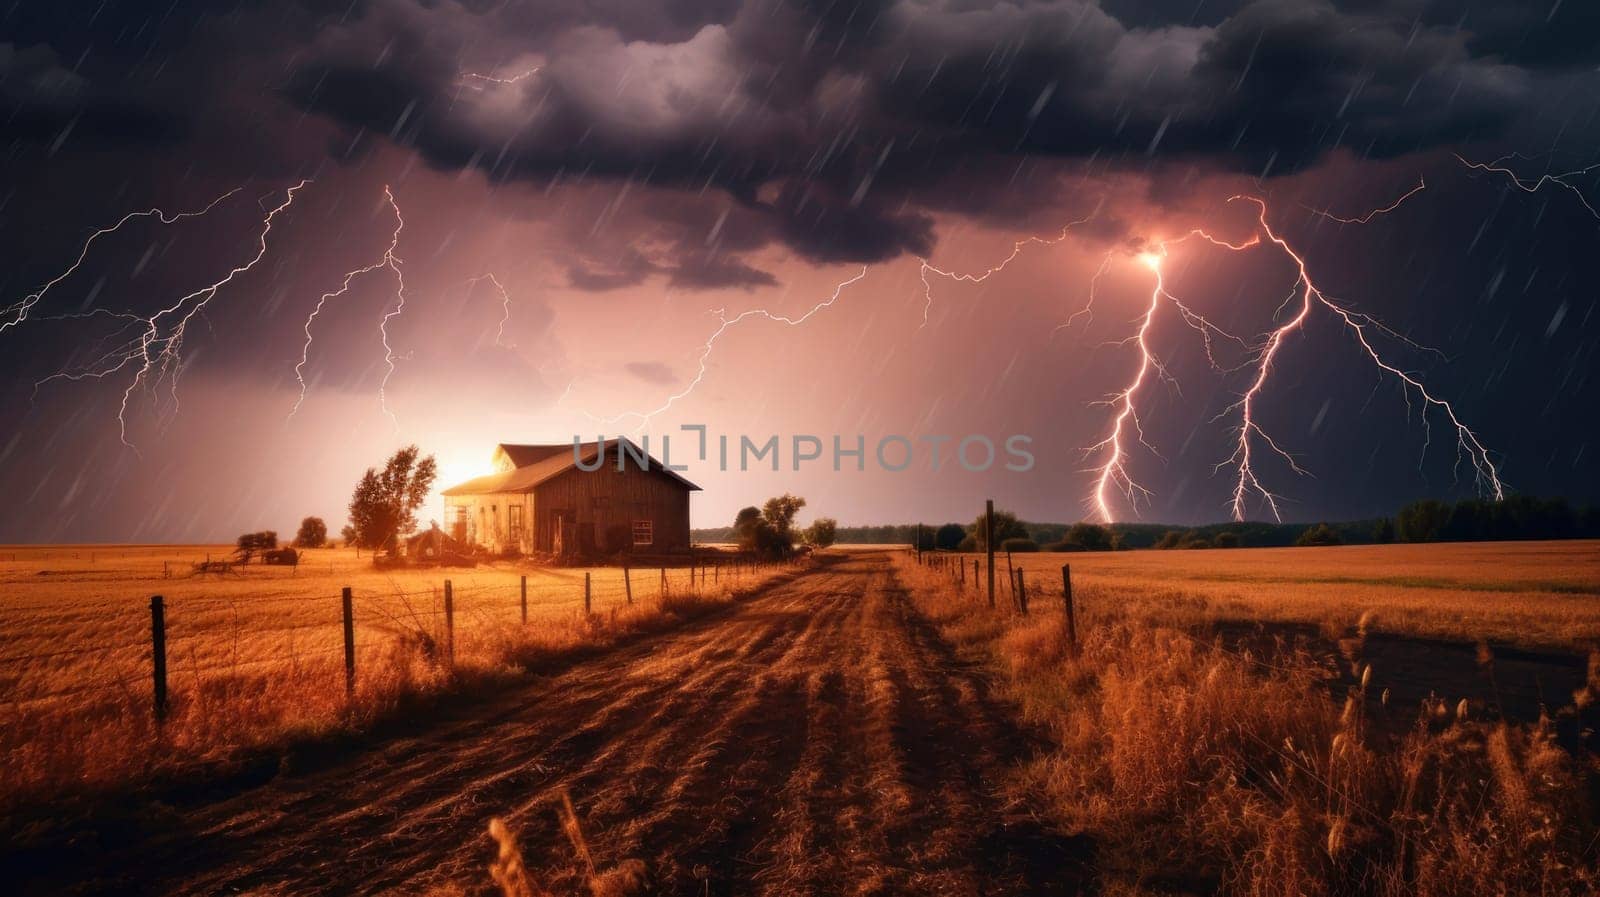 Beautiful lightning, picture, screensaver for your phone or computer. Storm clouds and distant thunder and lightning strikes above the ground